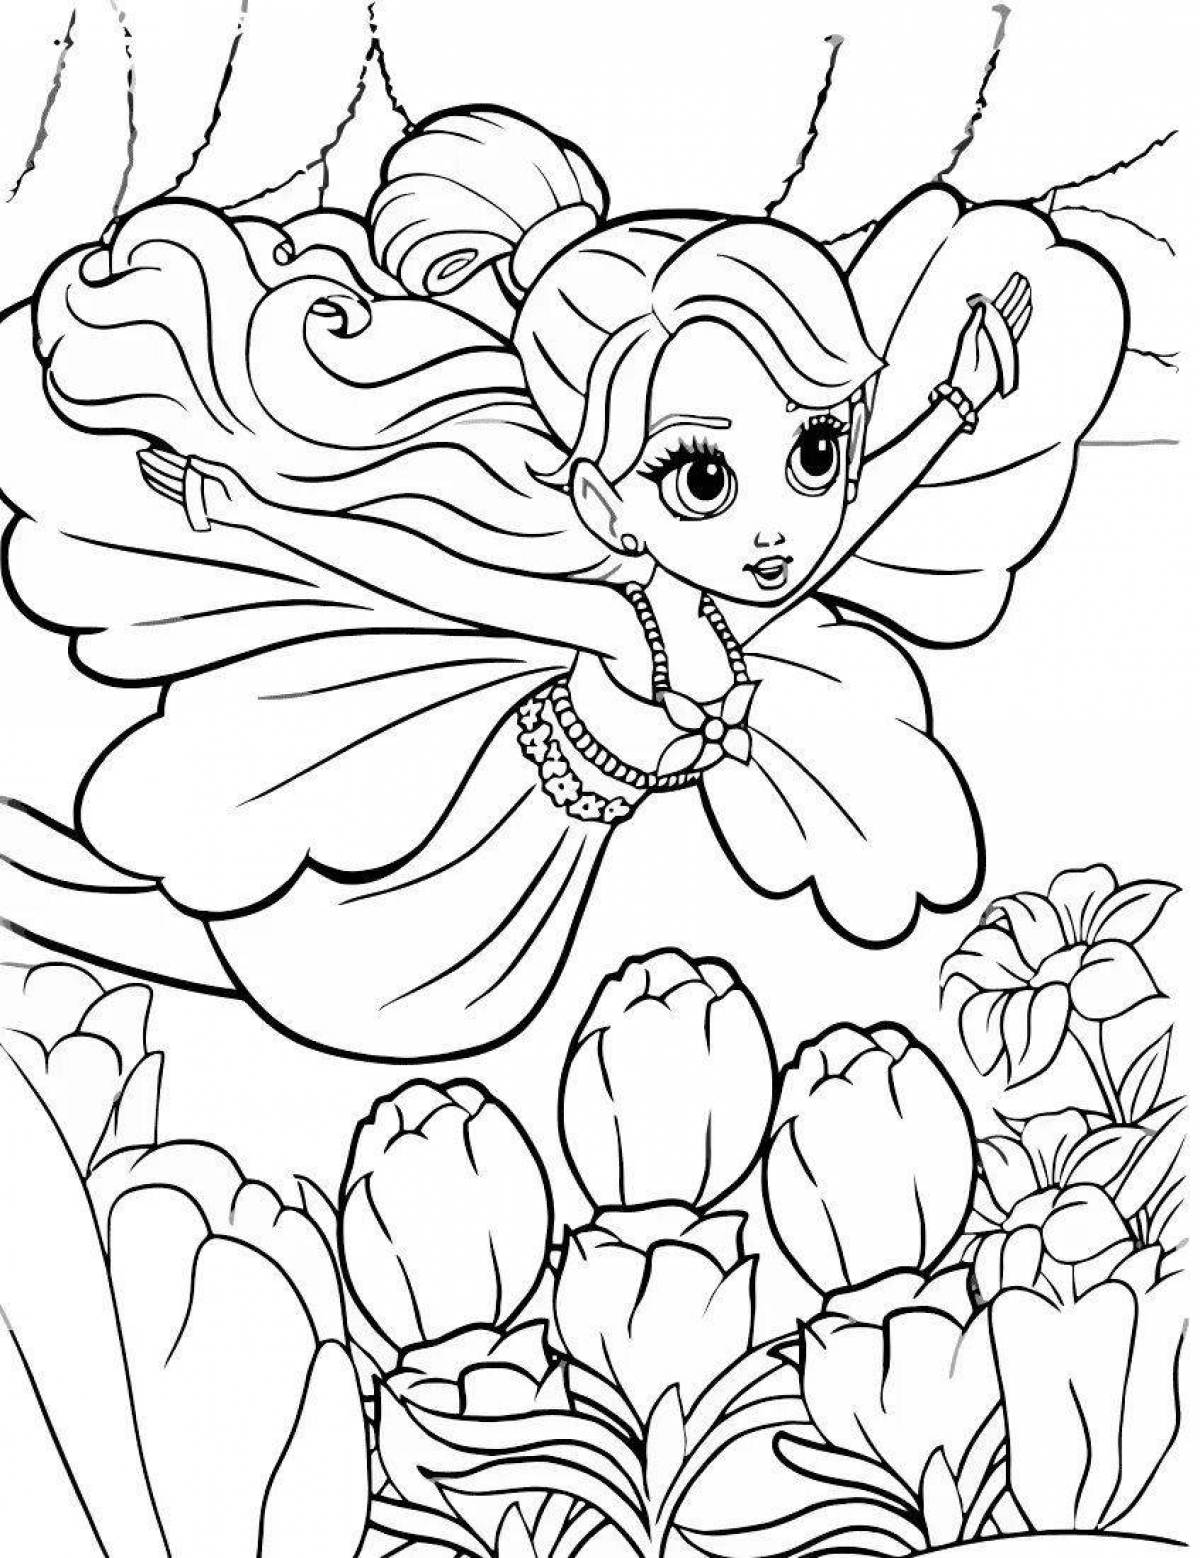 Fun coloring for girls 7 years old grade 1